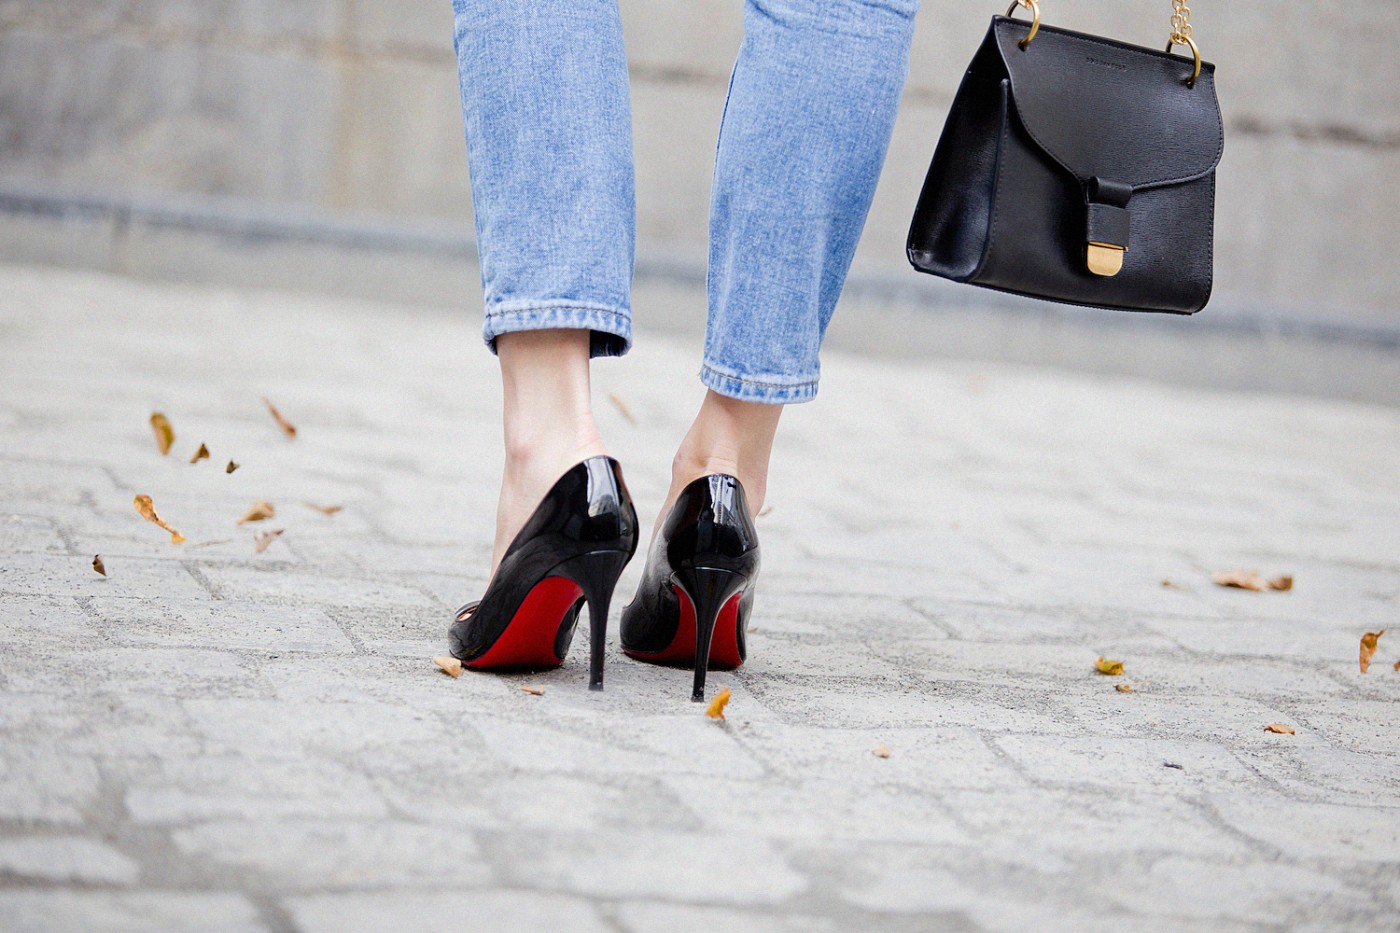 Saturday night fever | mom jeans - black ruffles top and Louboutin Pigalle